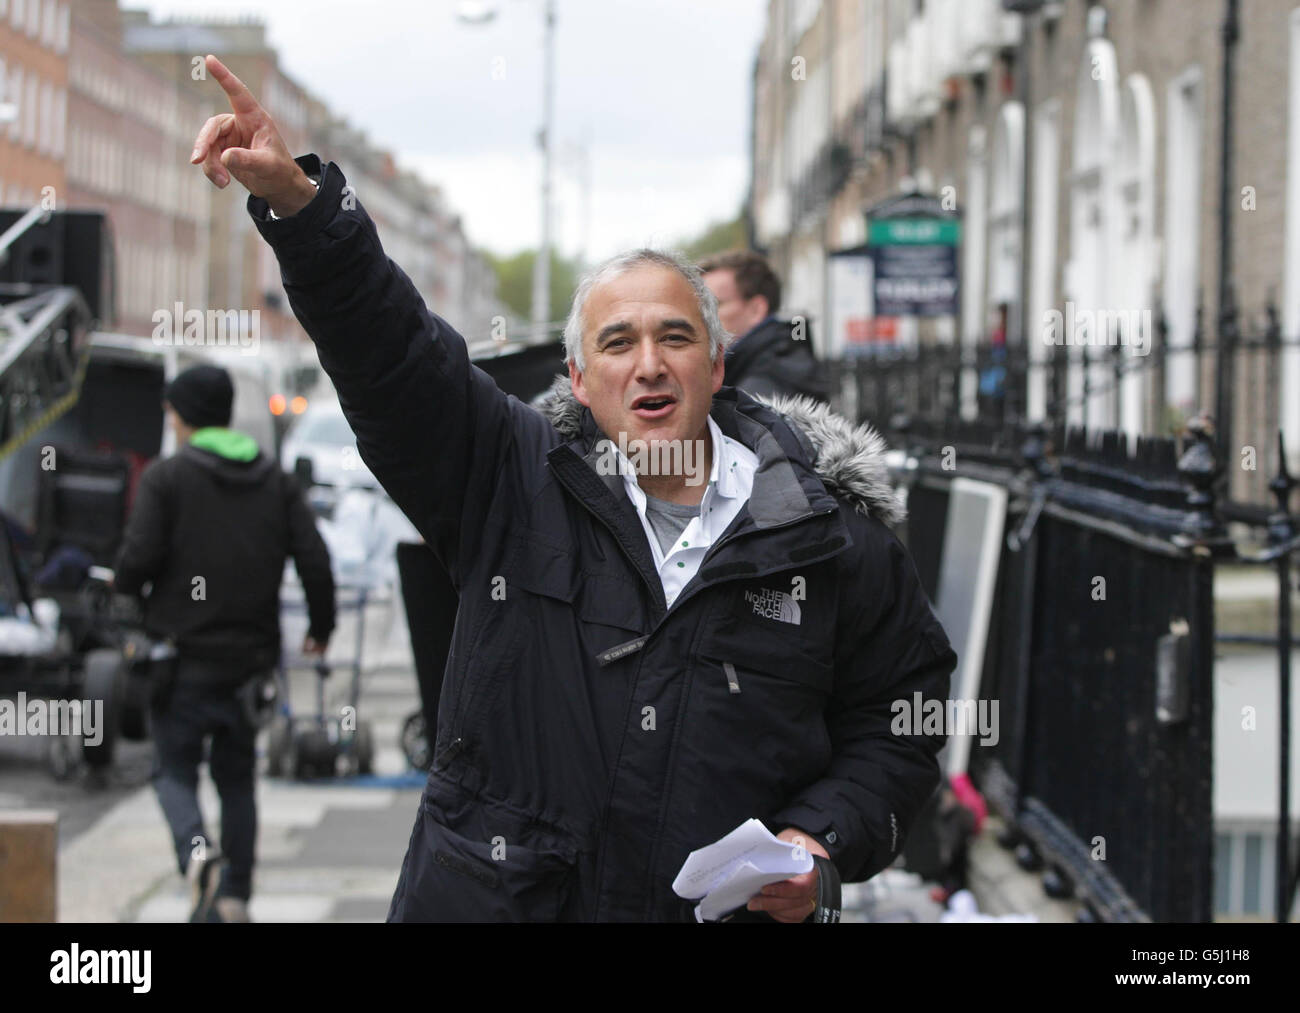 Director Stephen Brown pictured during a break from filming of 'The Sea' starring Ciaran Hinds and Sinead Cusack on Mount street Dublin today. Stock Photo